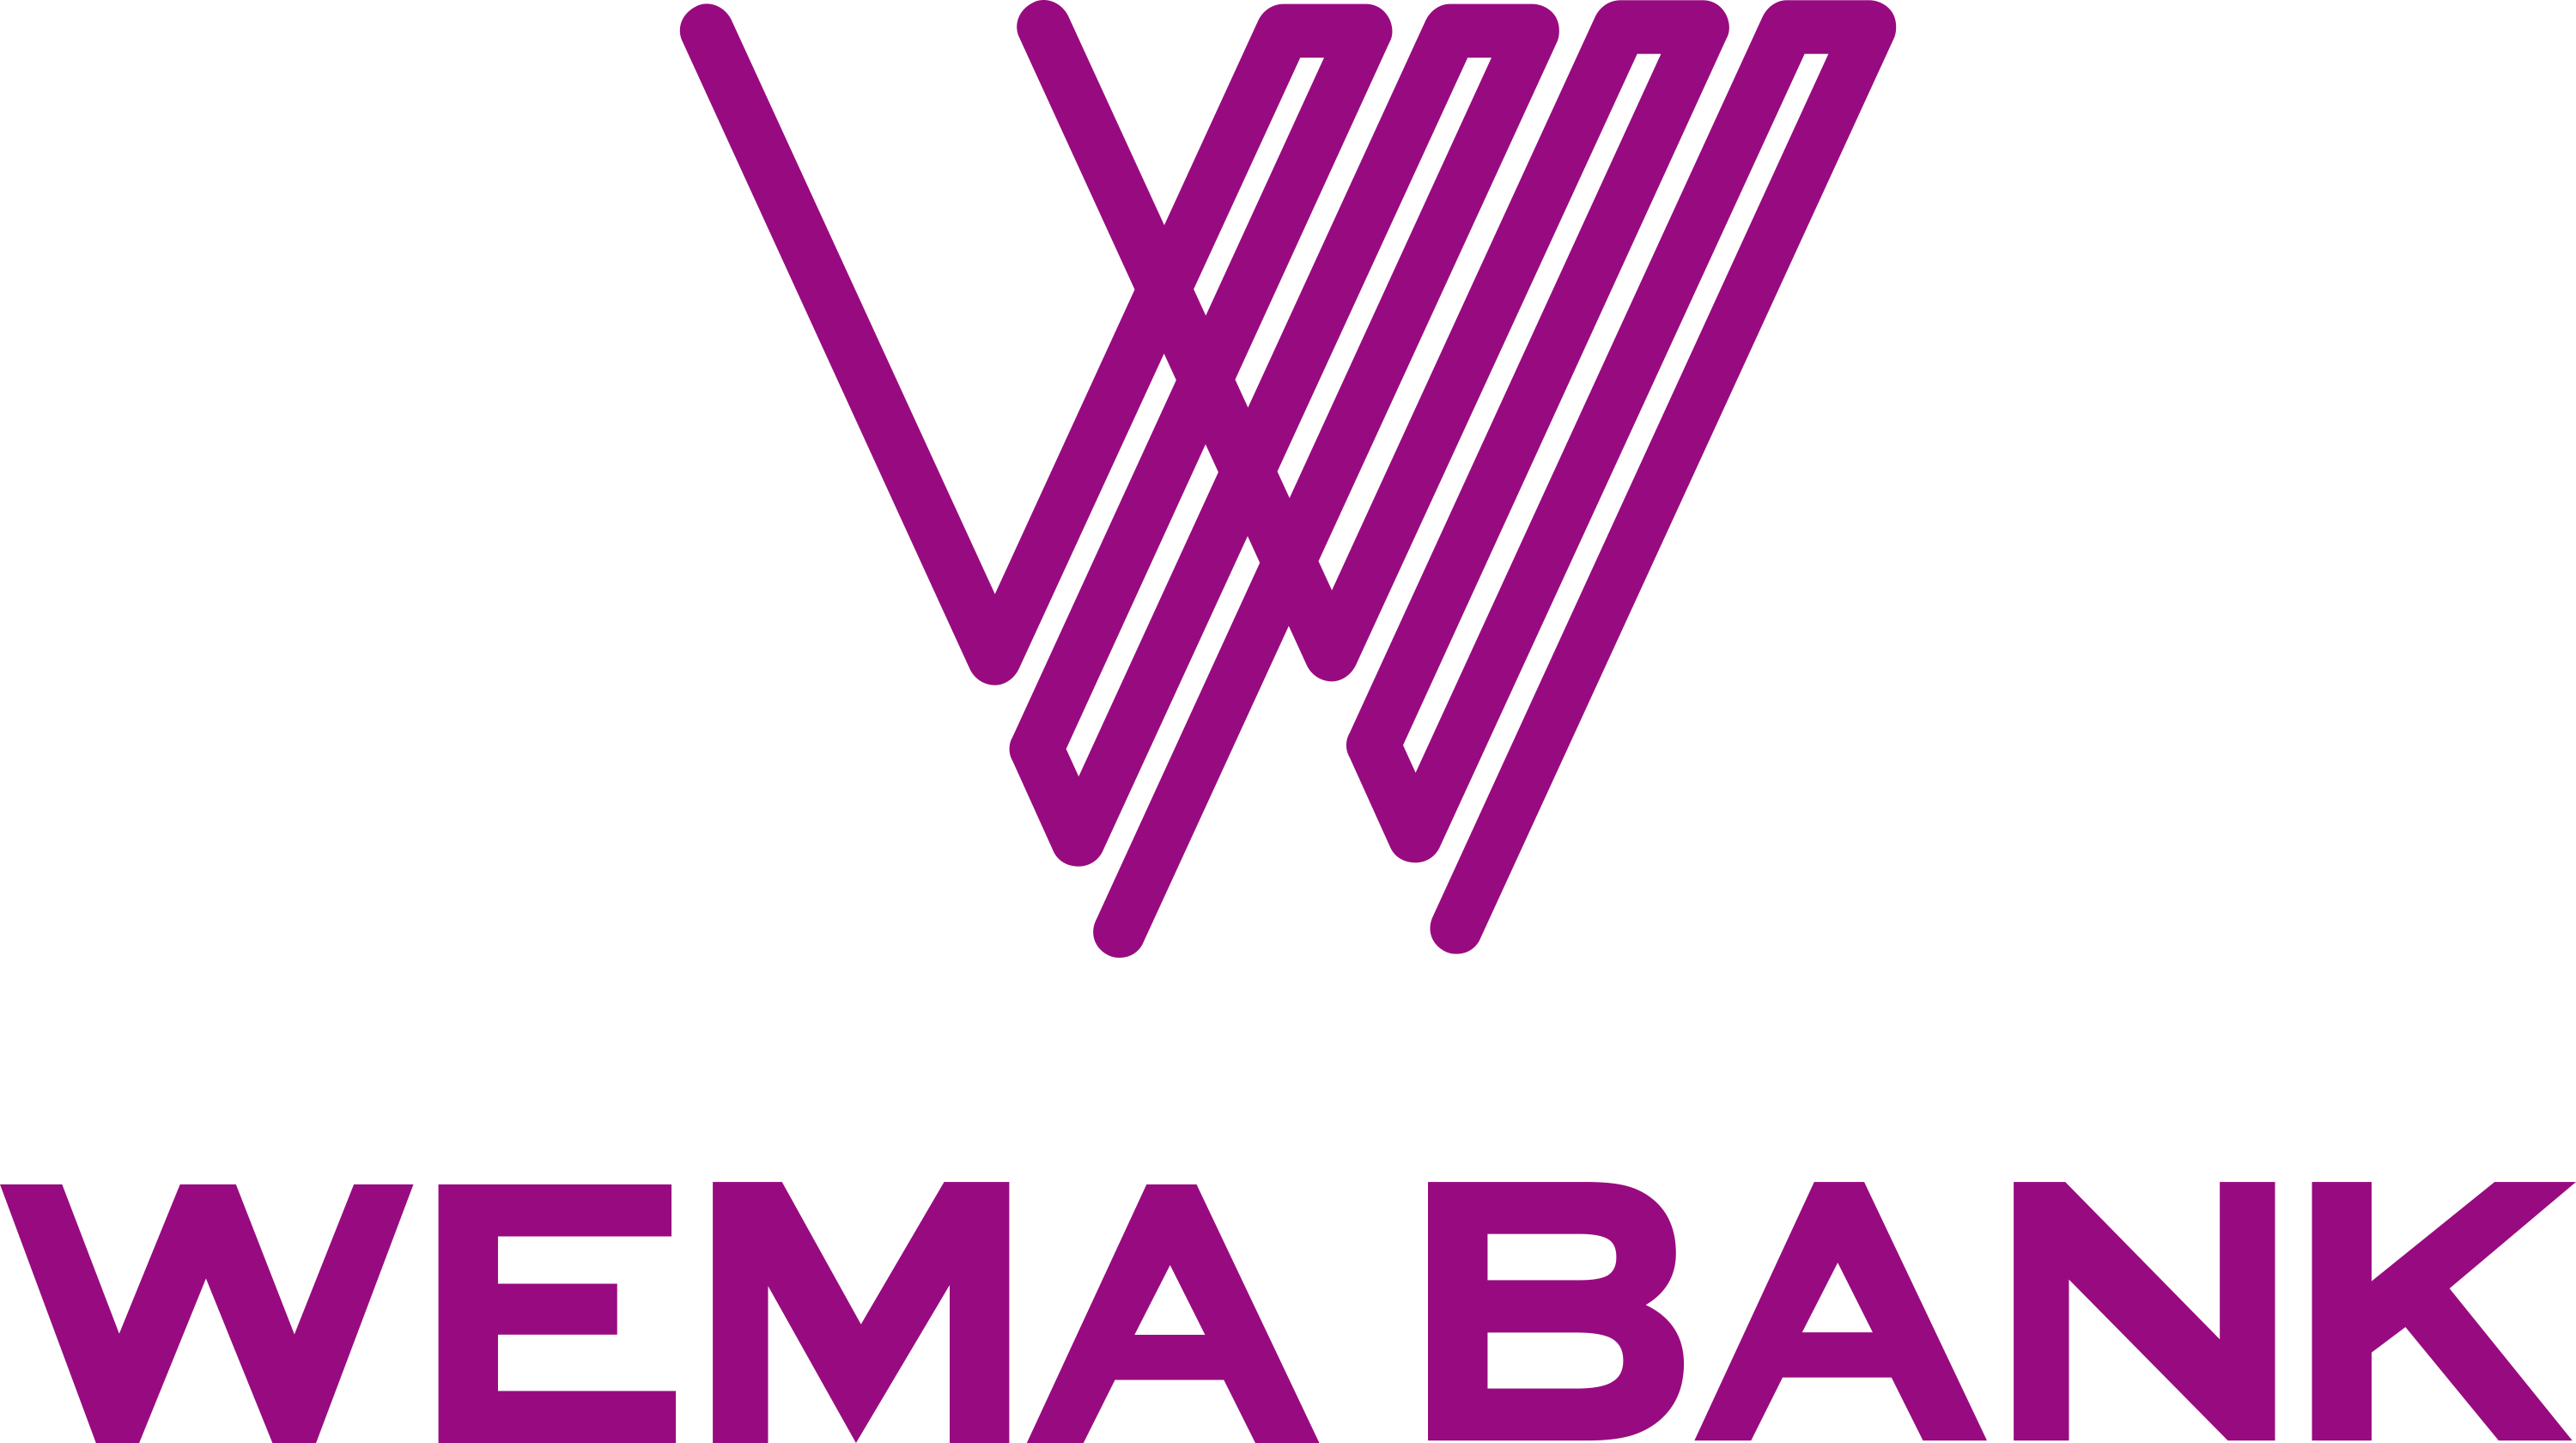 Wema Bank will remain a national bank and open branches in the Southeast.